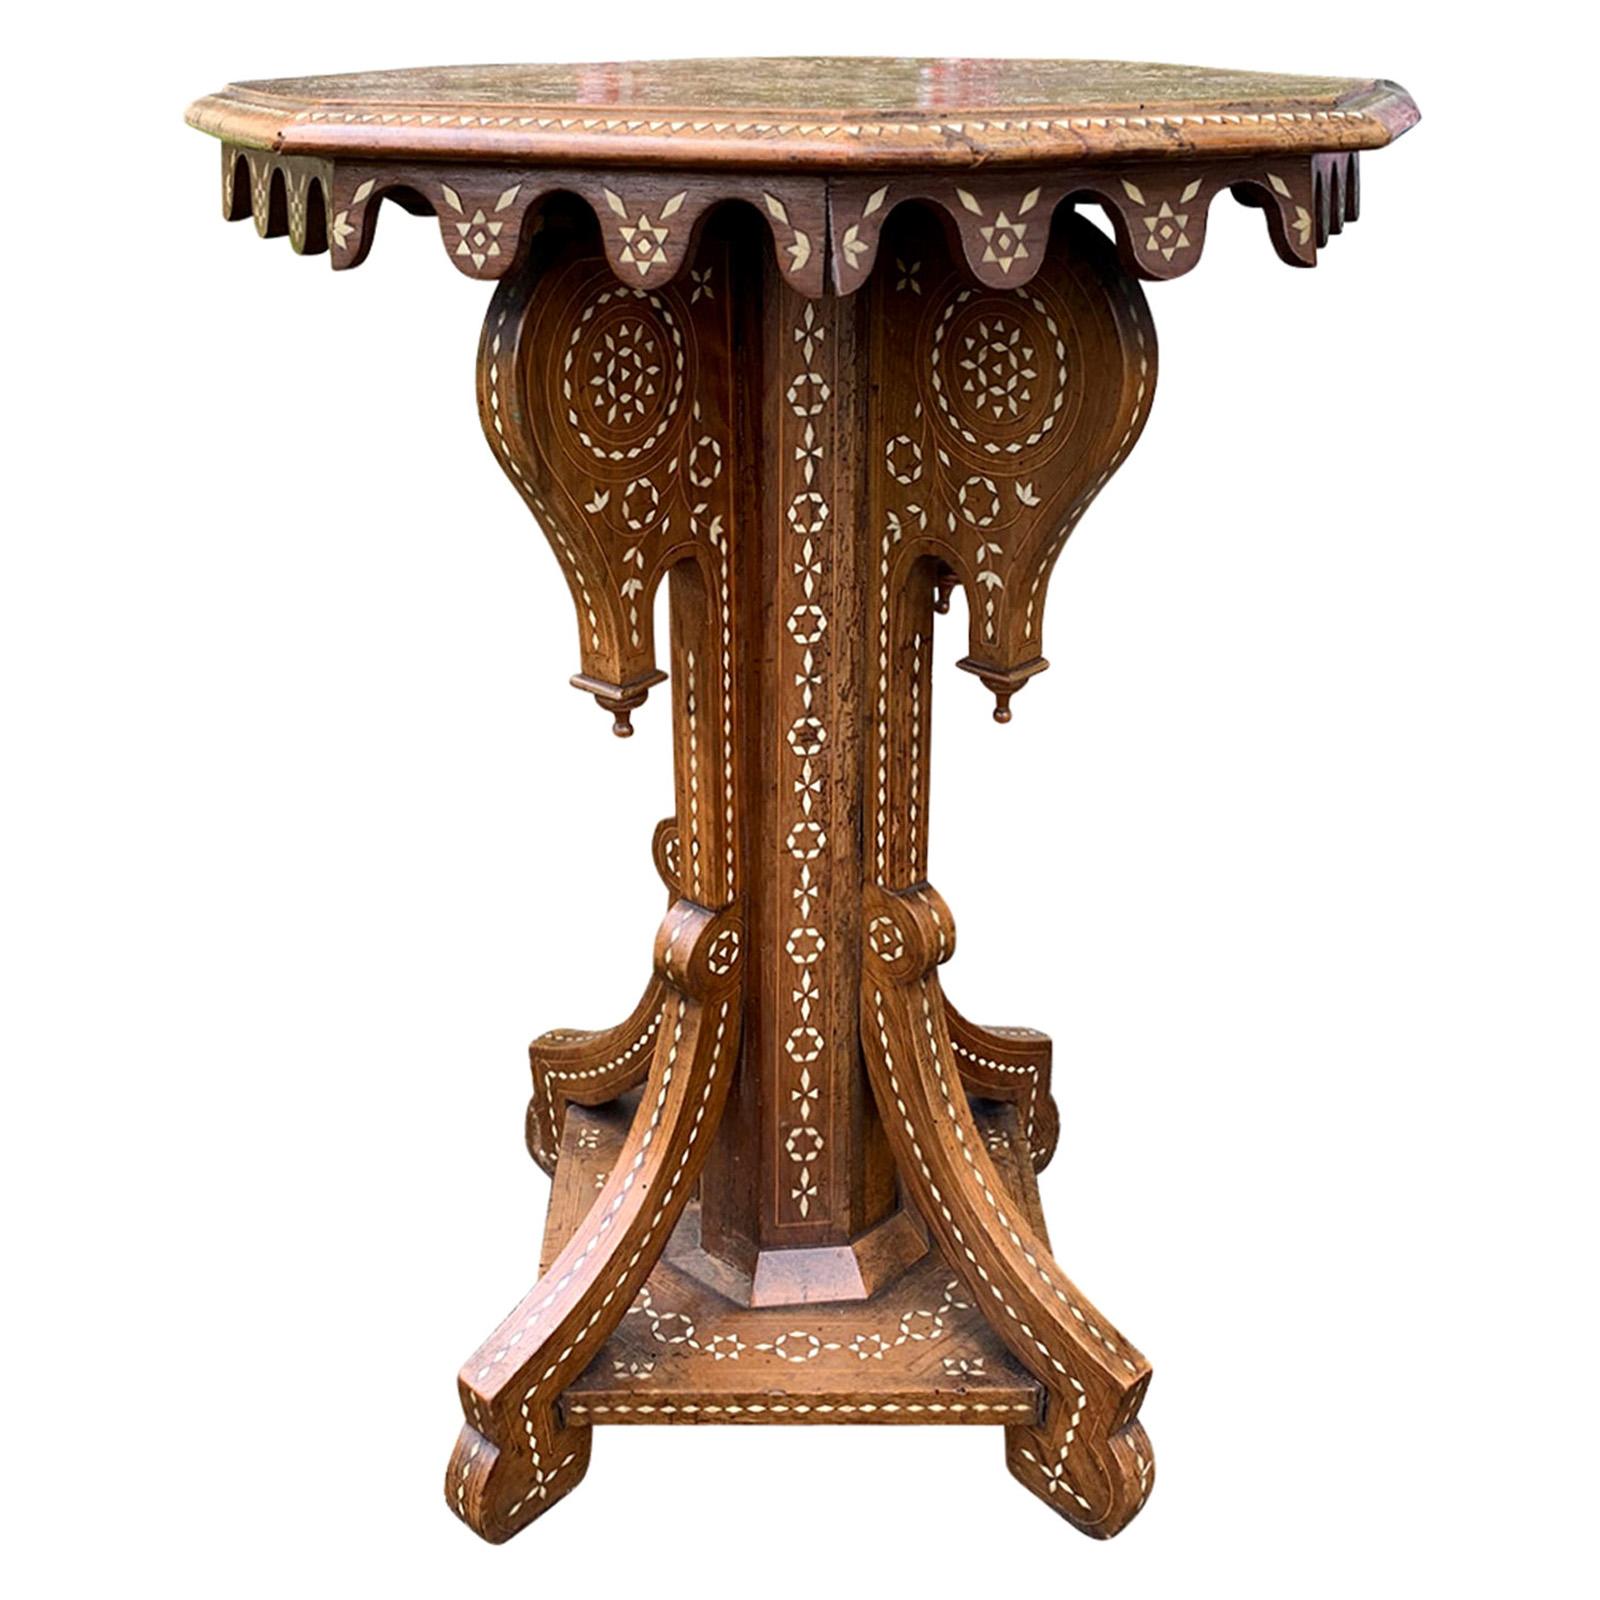 Early 20th Century Heavily Inlaid Teak and Satinwood Octagonal Side Table